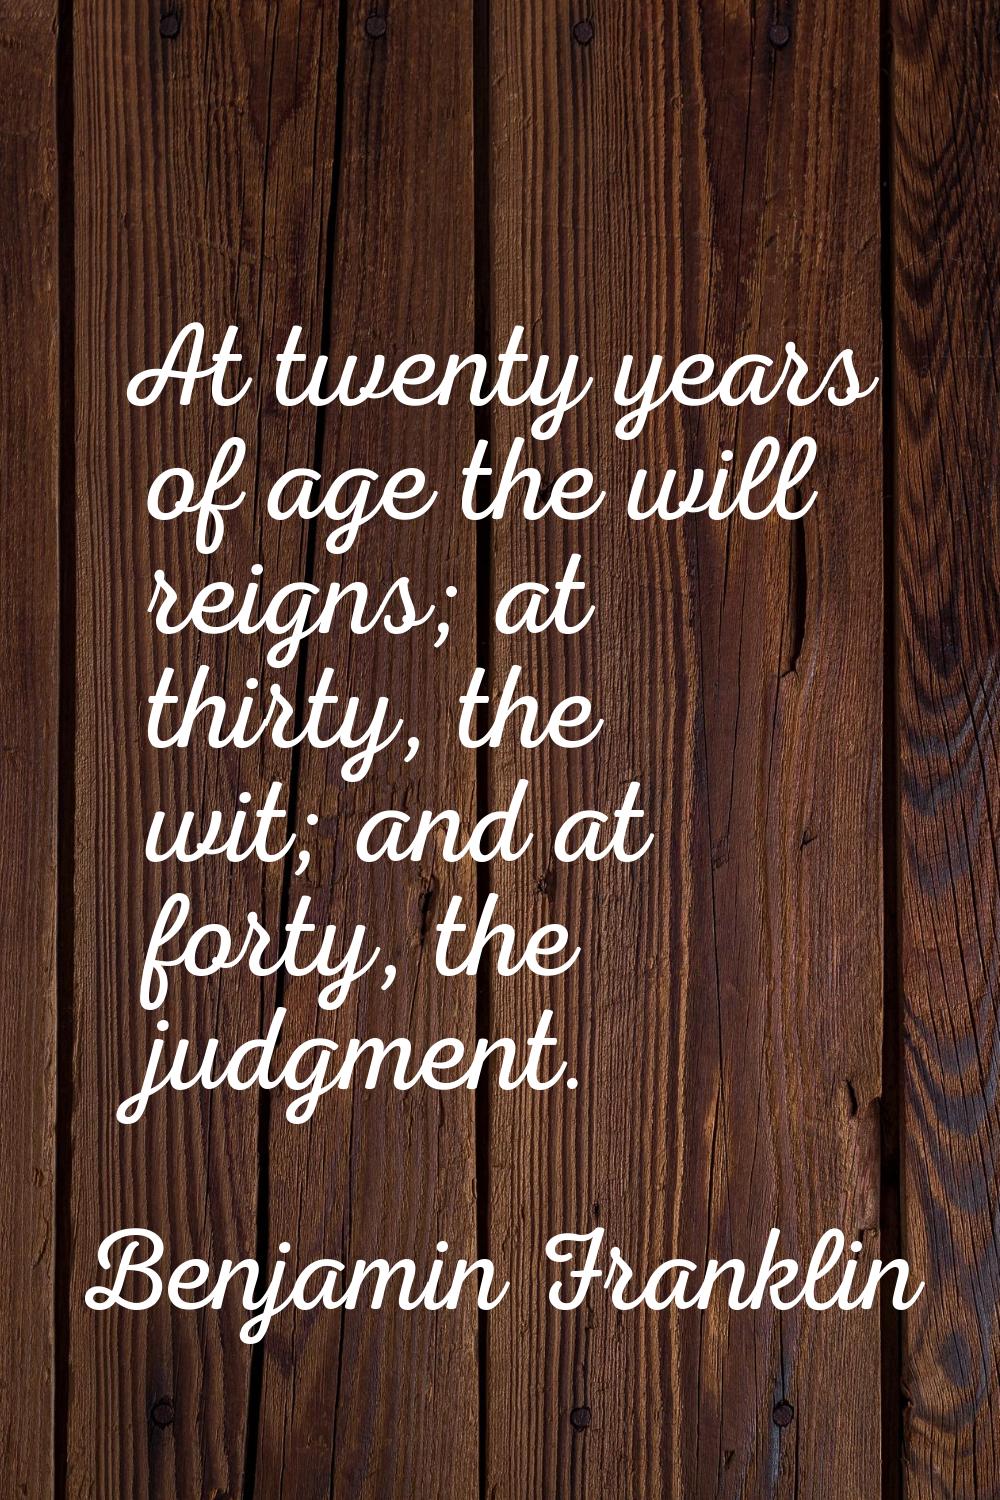 At twenty years of age the will reigns; at thirty, the wit; and at forty, the judgment.